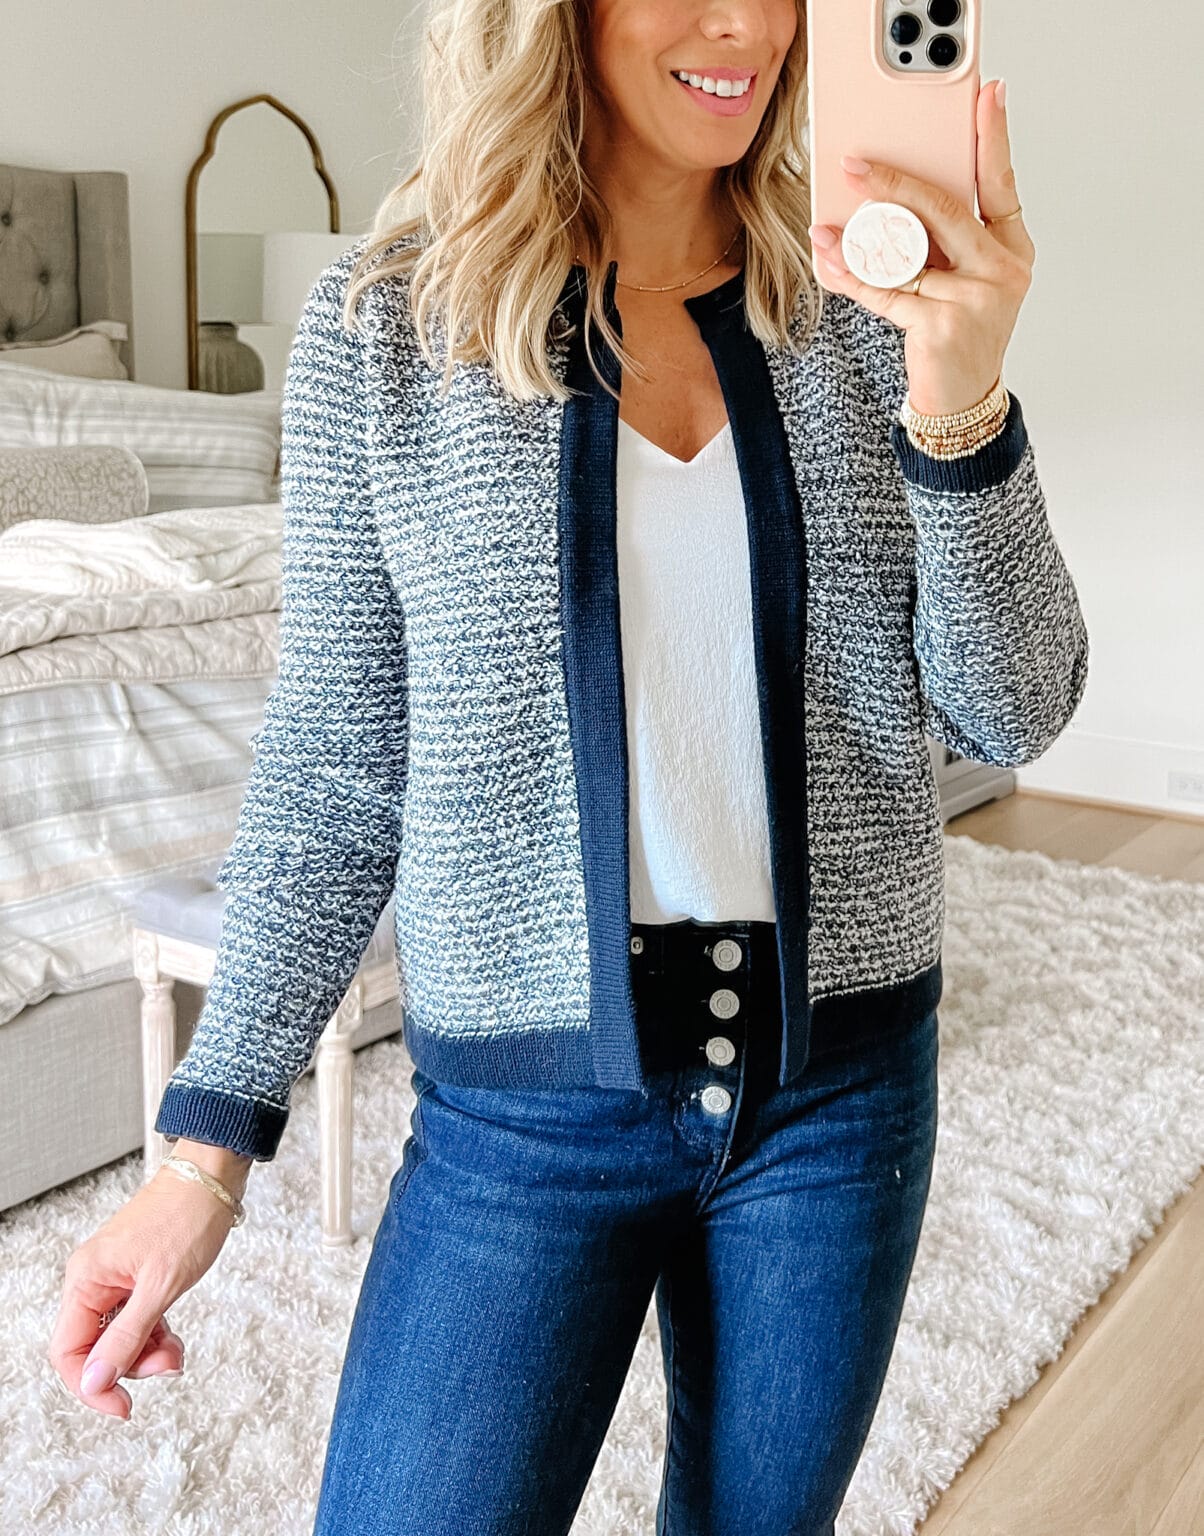 New Loft Outfits – Honey We're Home